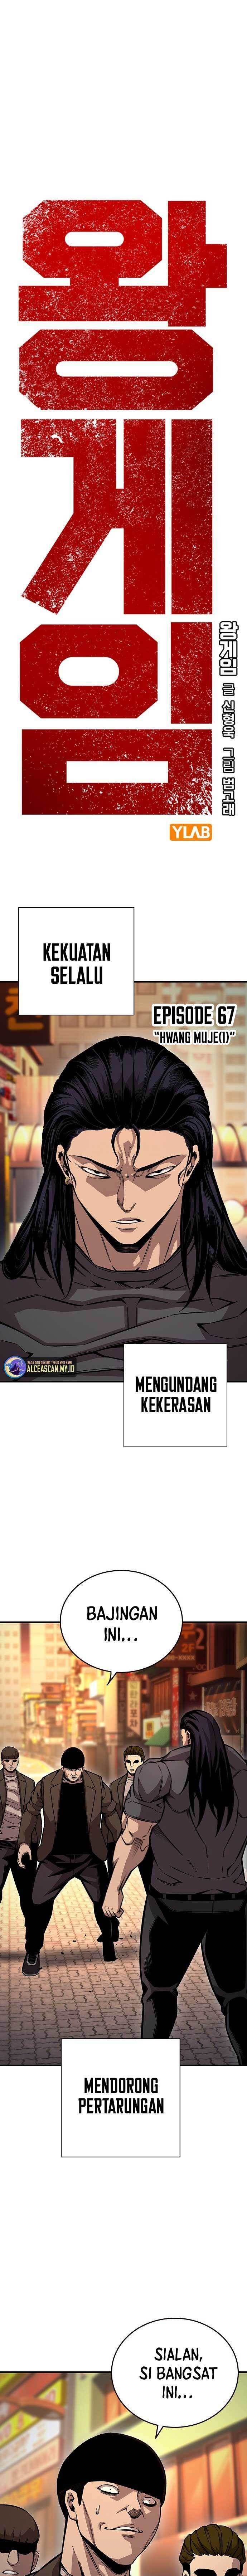 King Game Chapter 67